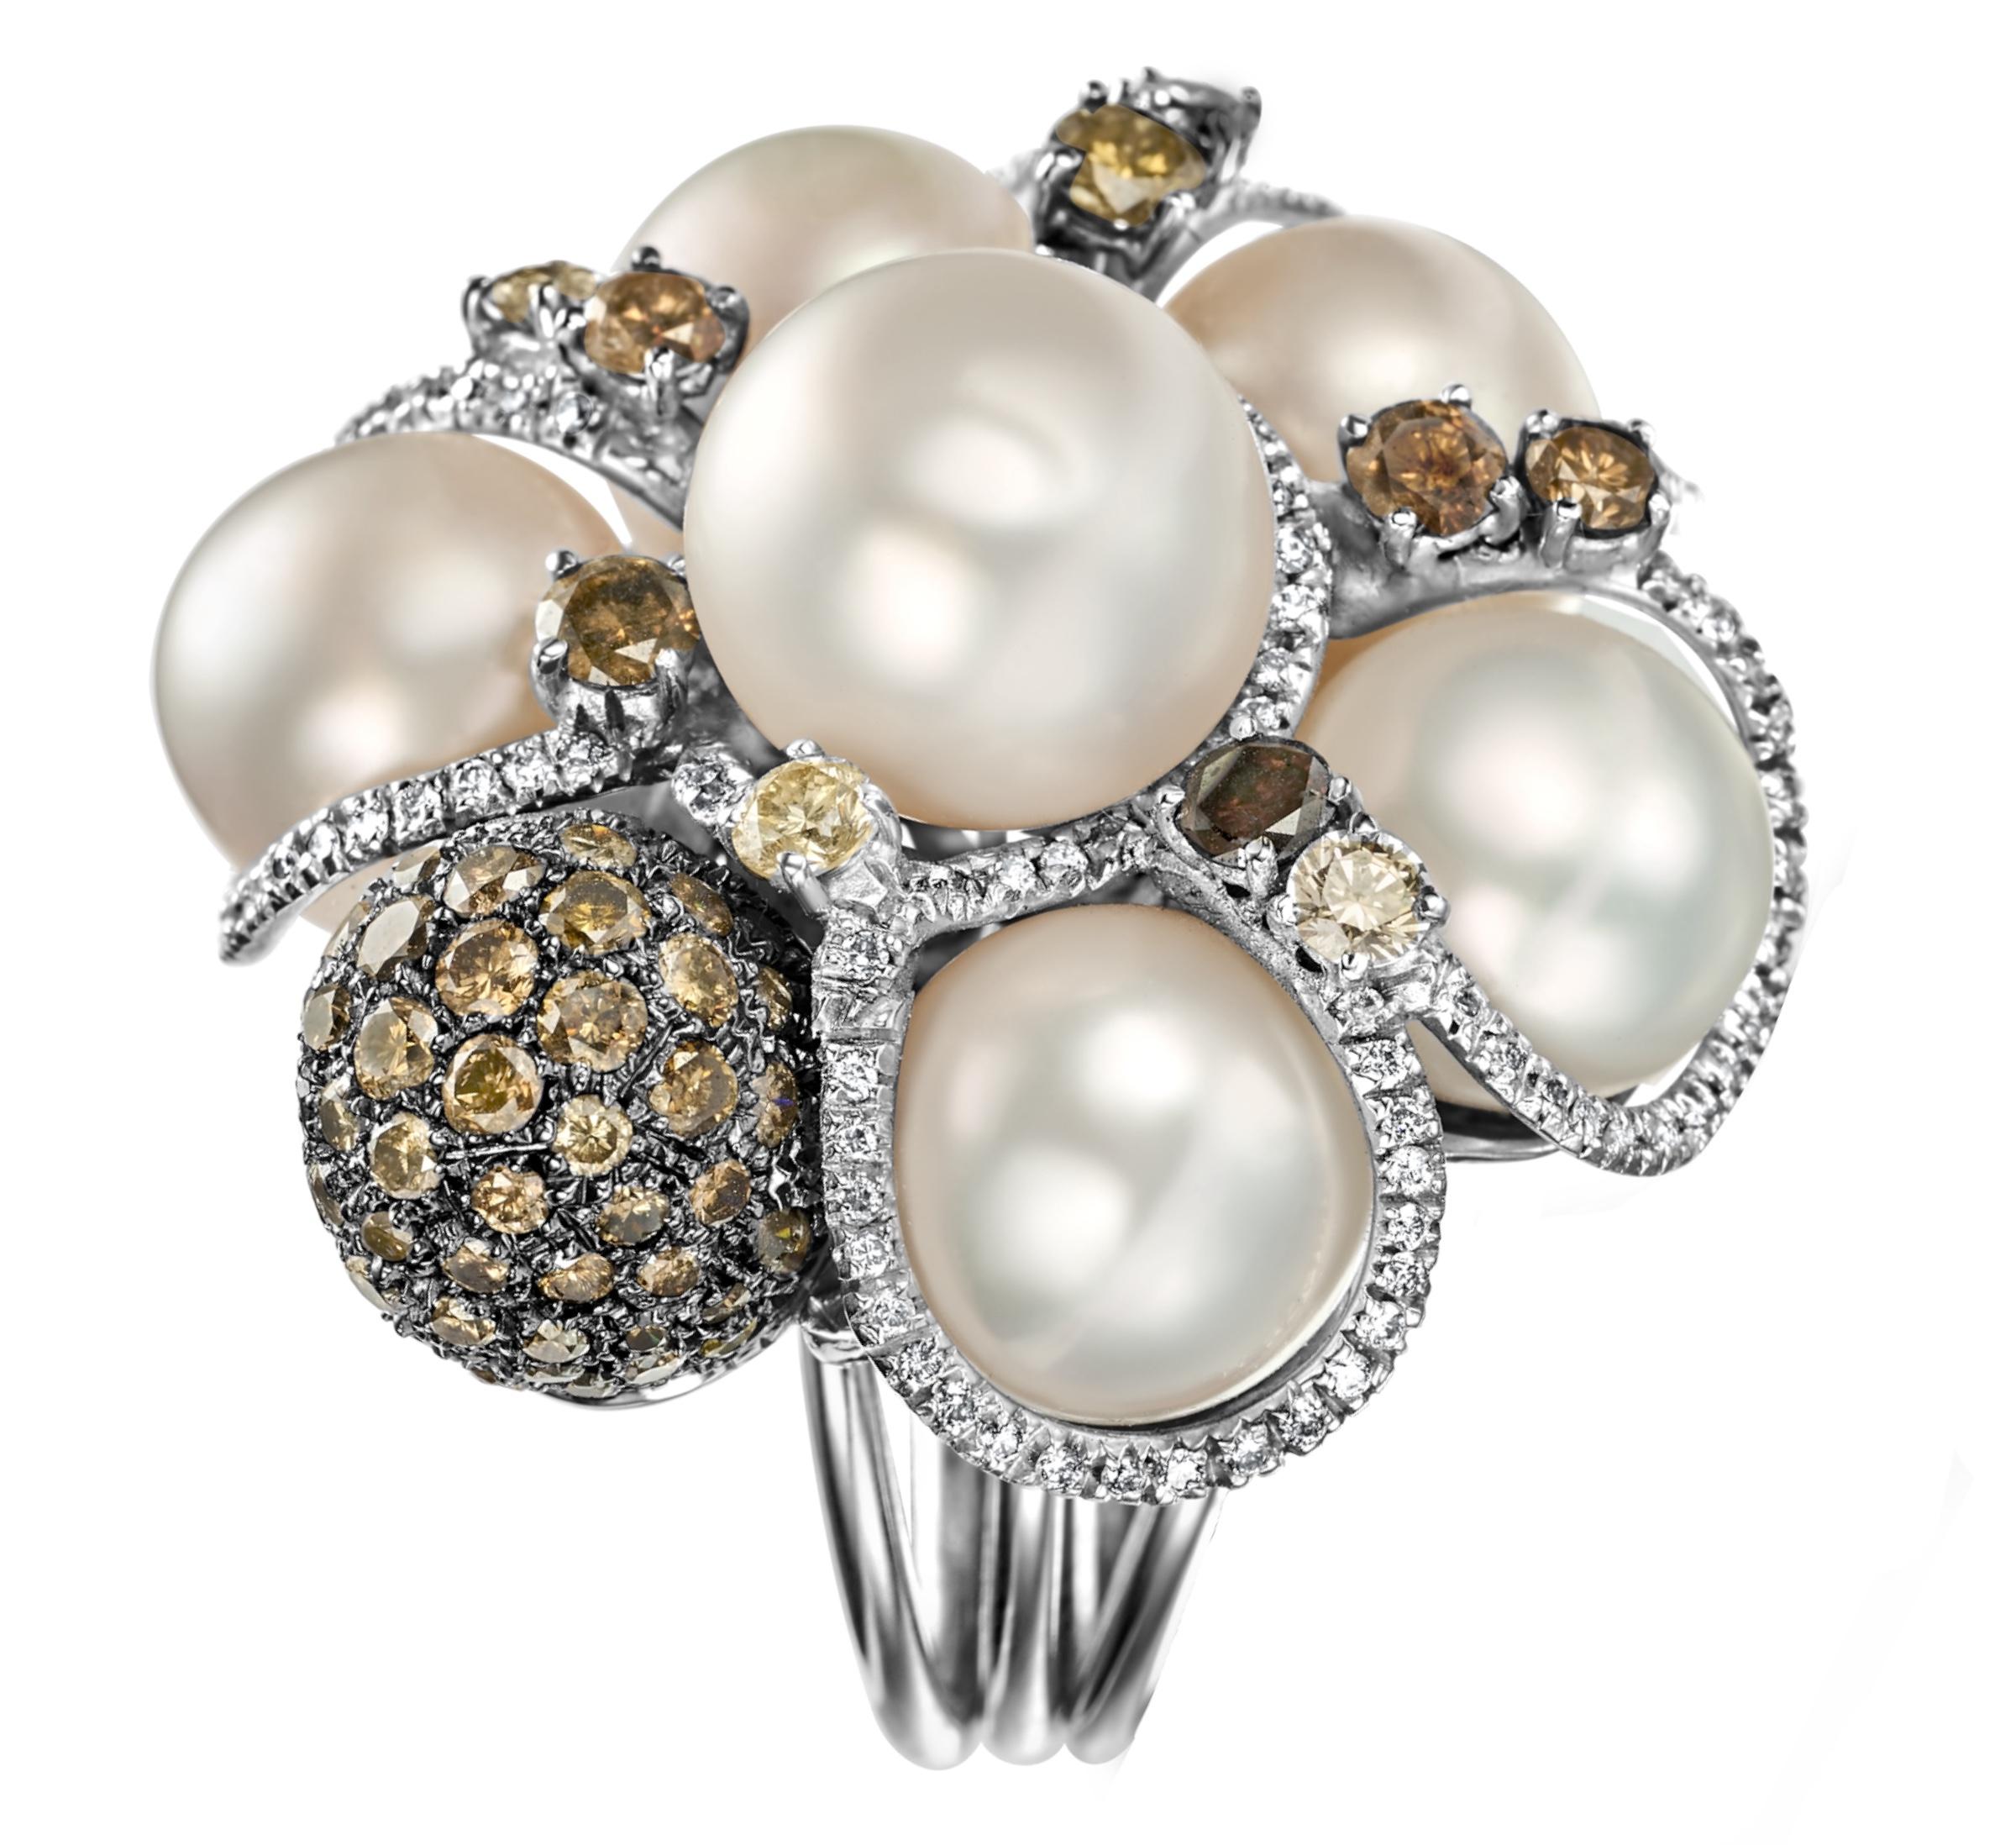 18kt White Gold Ring with 3.65ct Diamonds& Pearls, Can Purchase with Bracelet For Sale 1